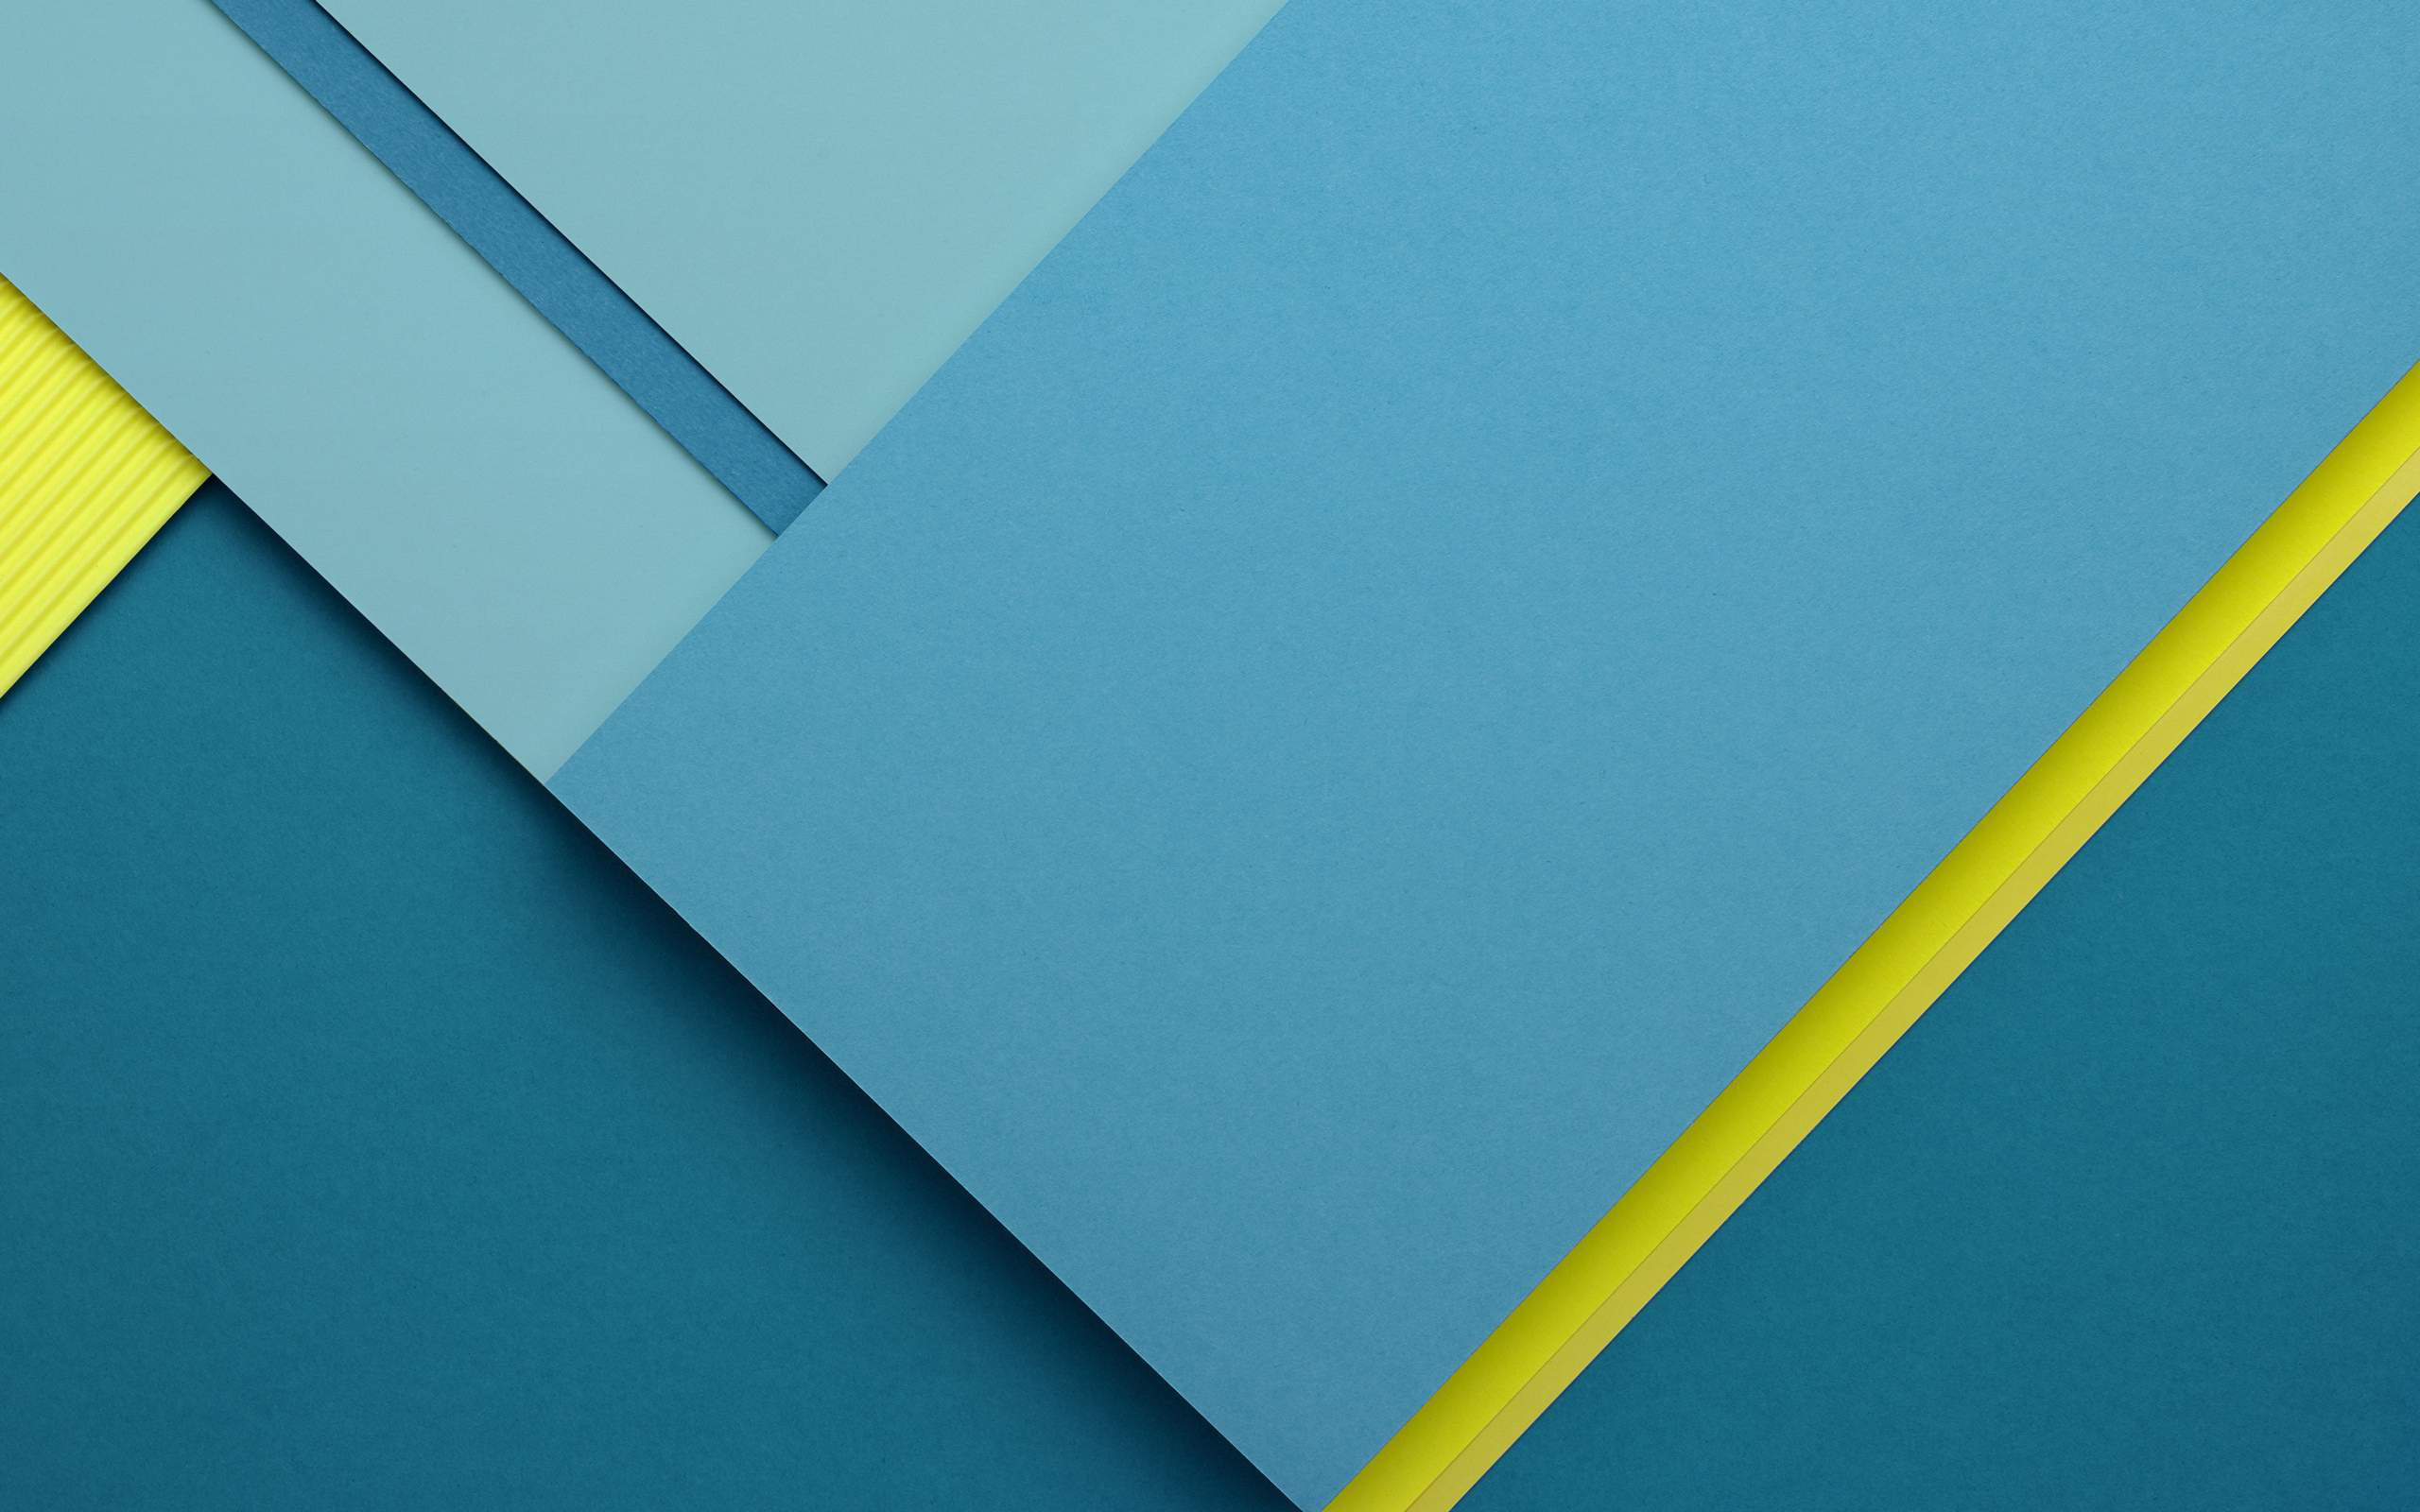 Chrome Os To Get New Default Wallpaper Full Of Material Design